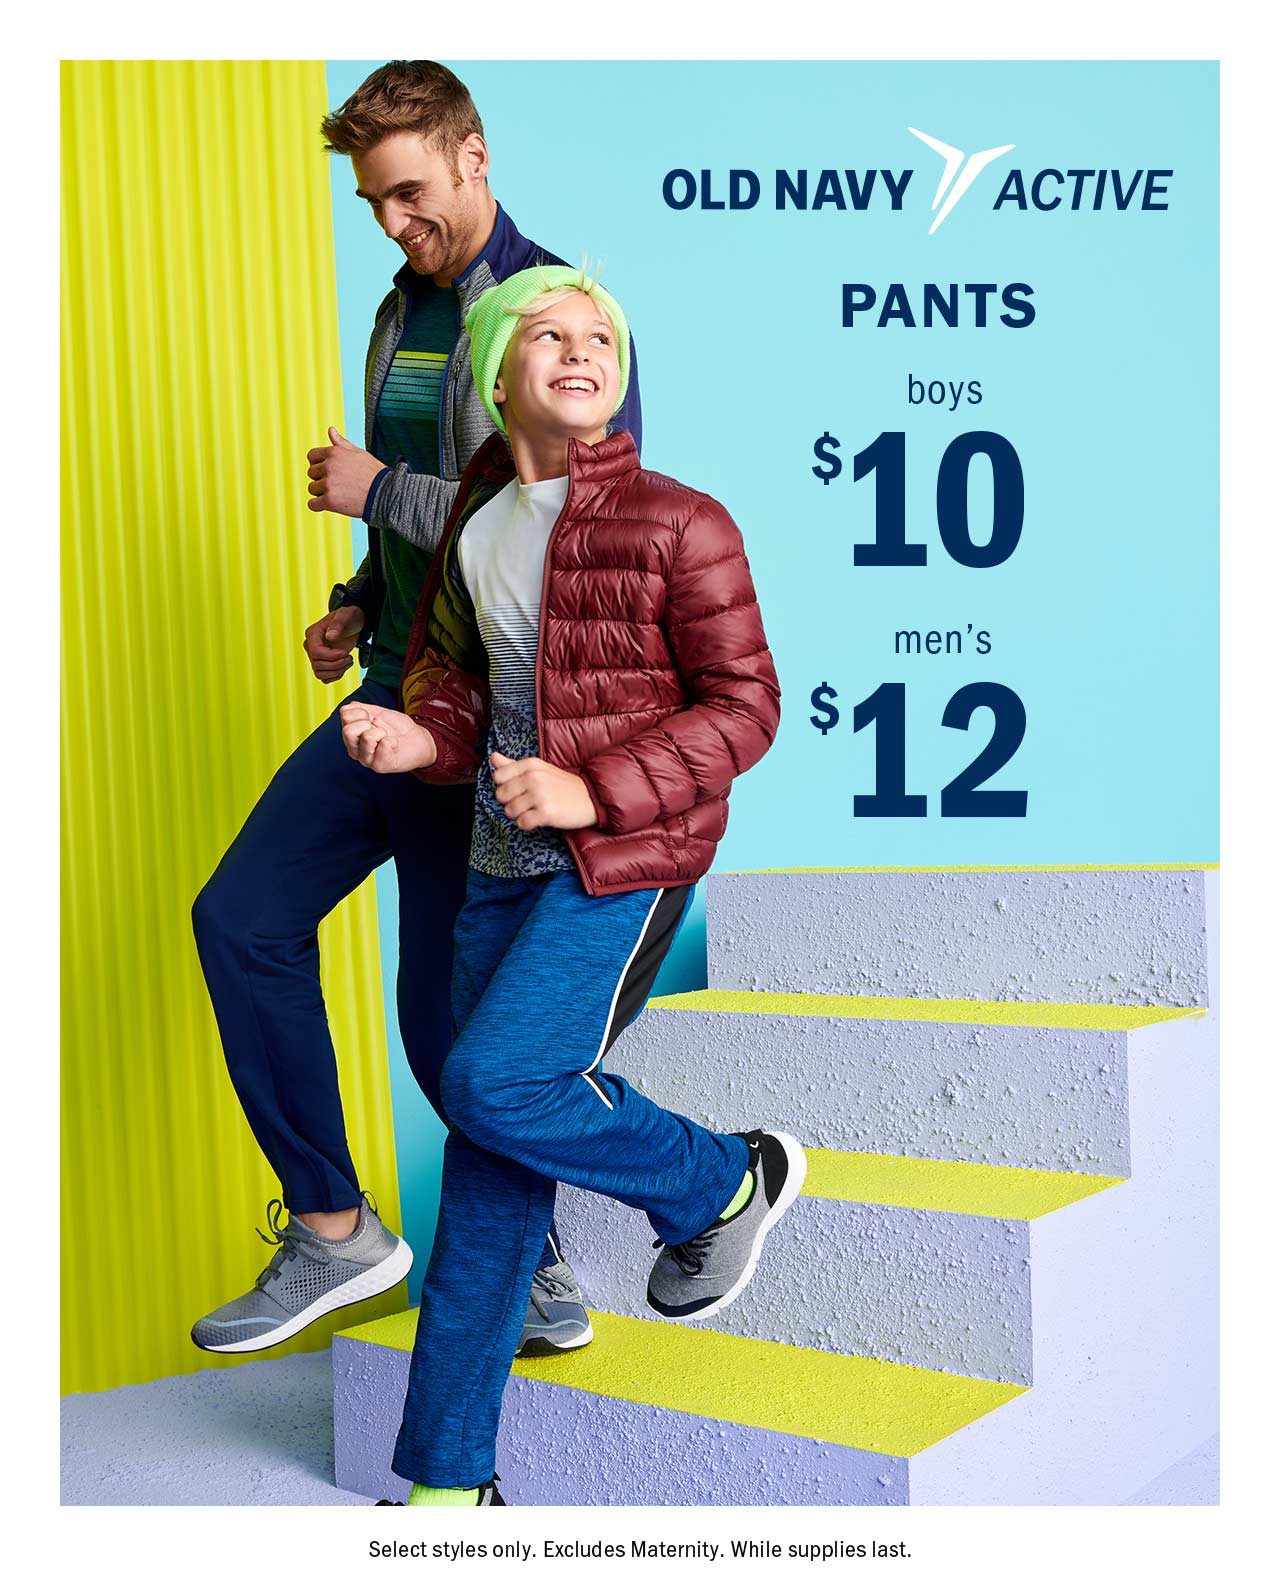 OLD NAVY ACTIVE PANTS